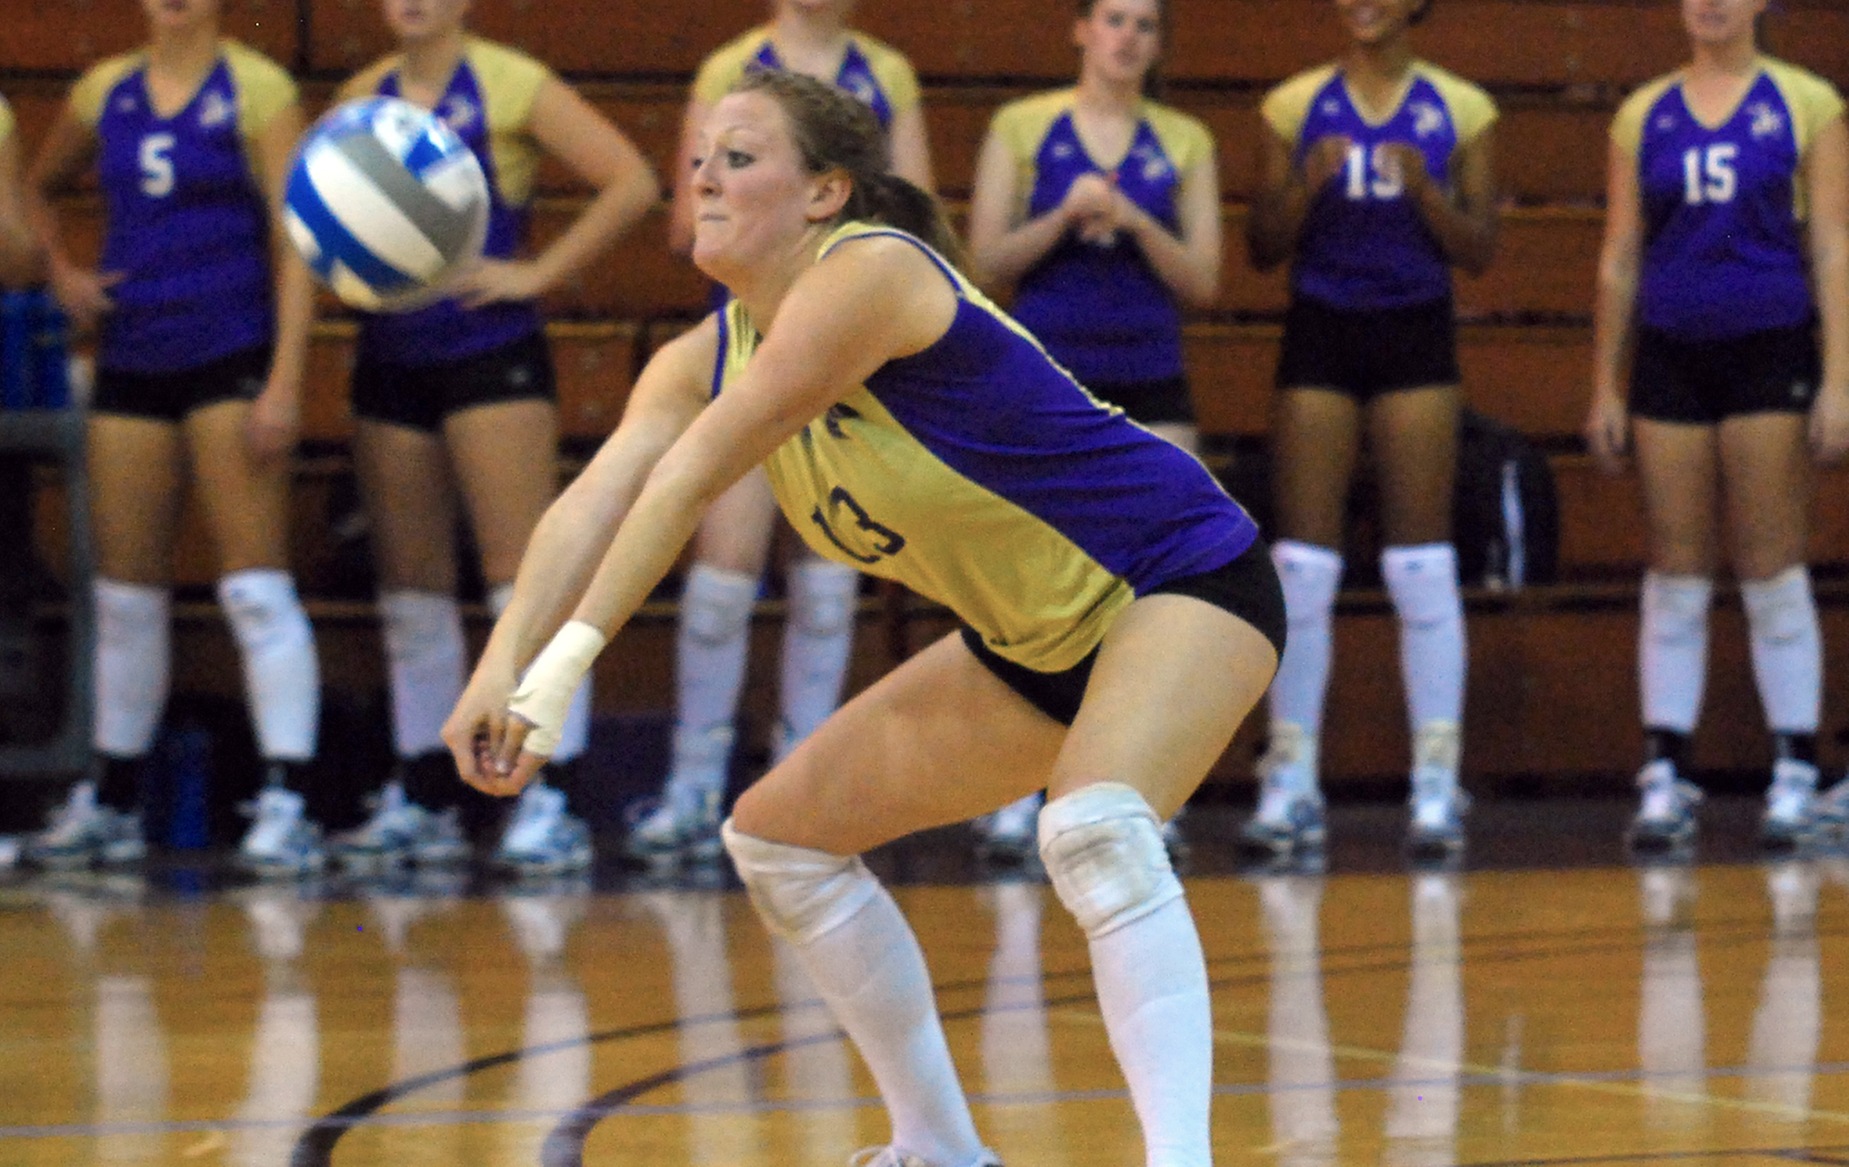 Defiance Falls to MSJ and Thomas More in Volleyball